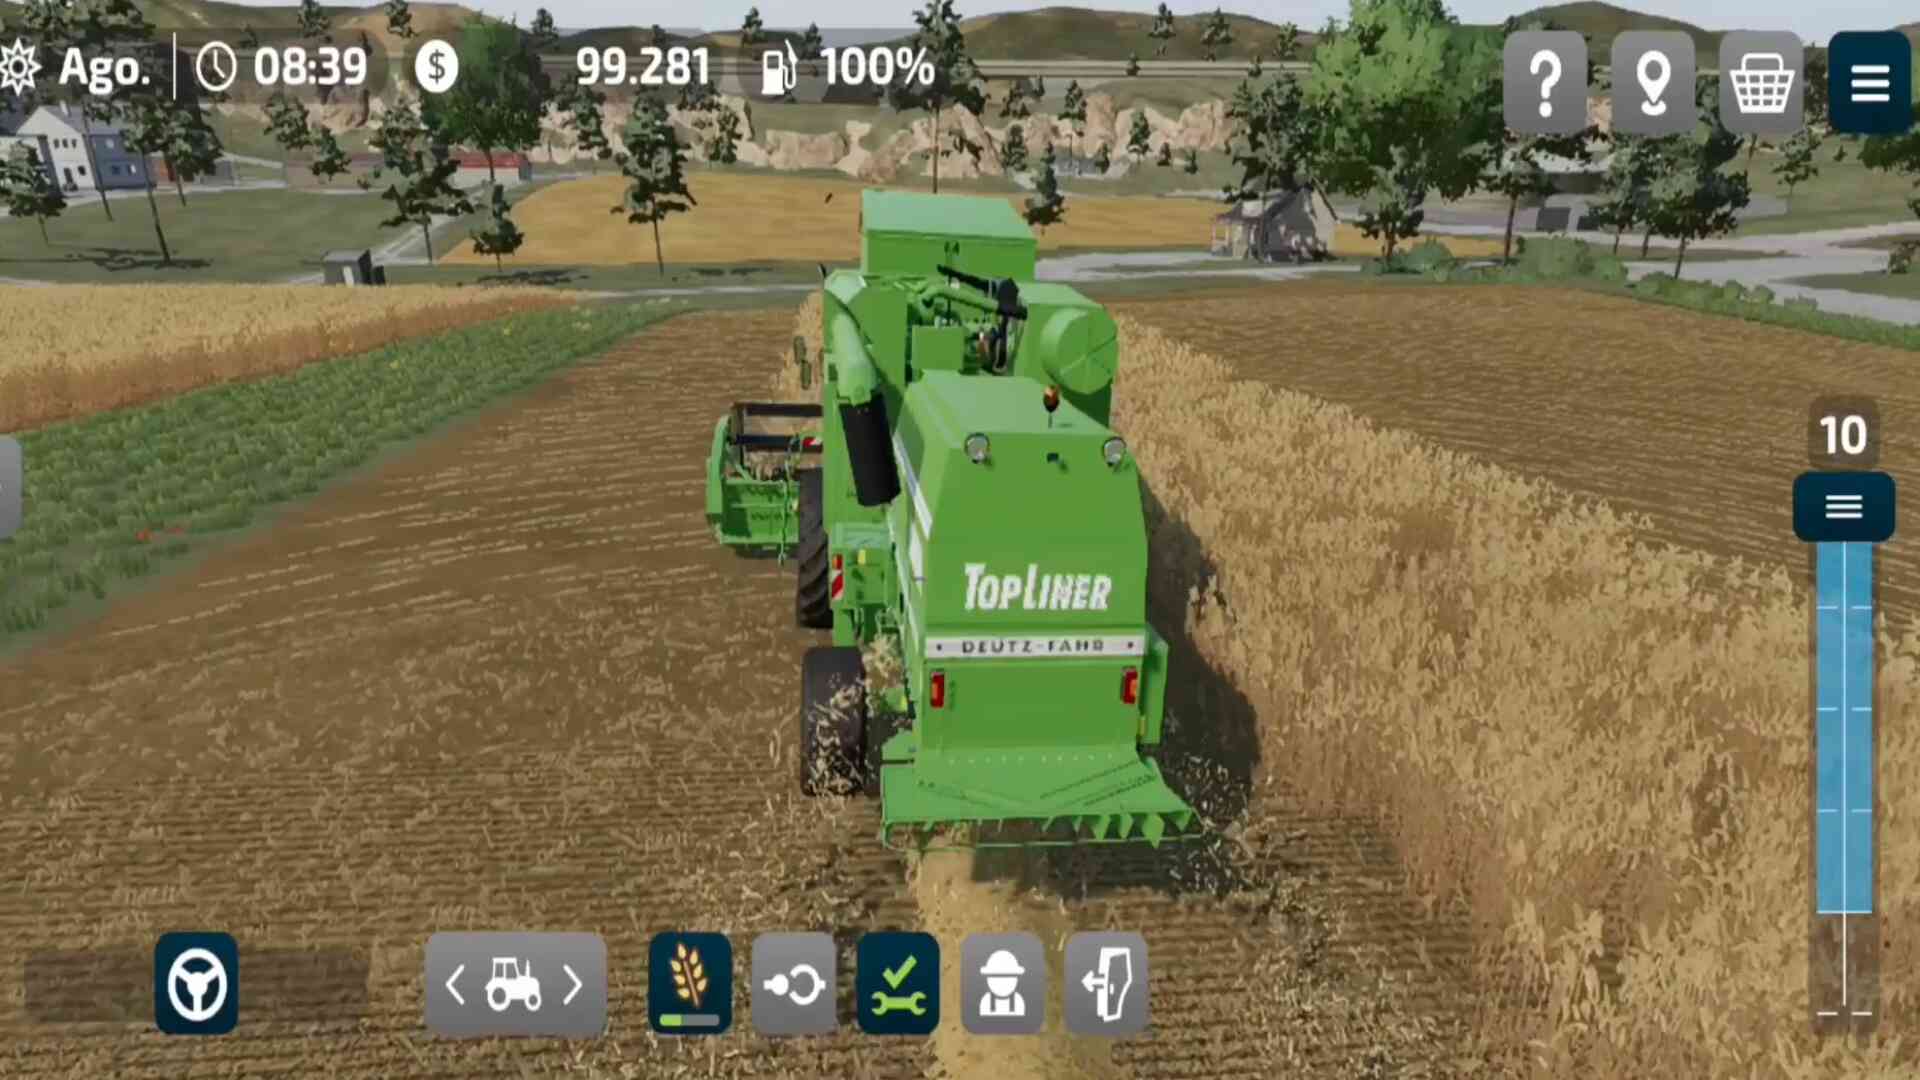 How to Download Farming Simulator 23 Mobile on Android for FREE #PlayM, Farming  Simulator 23